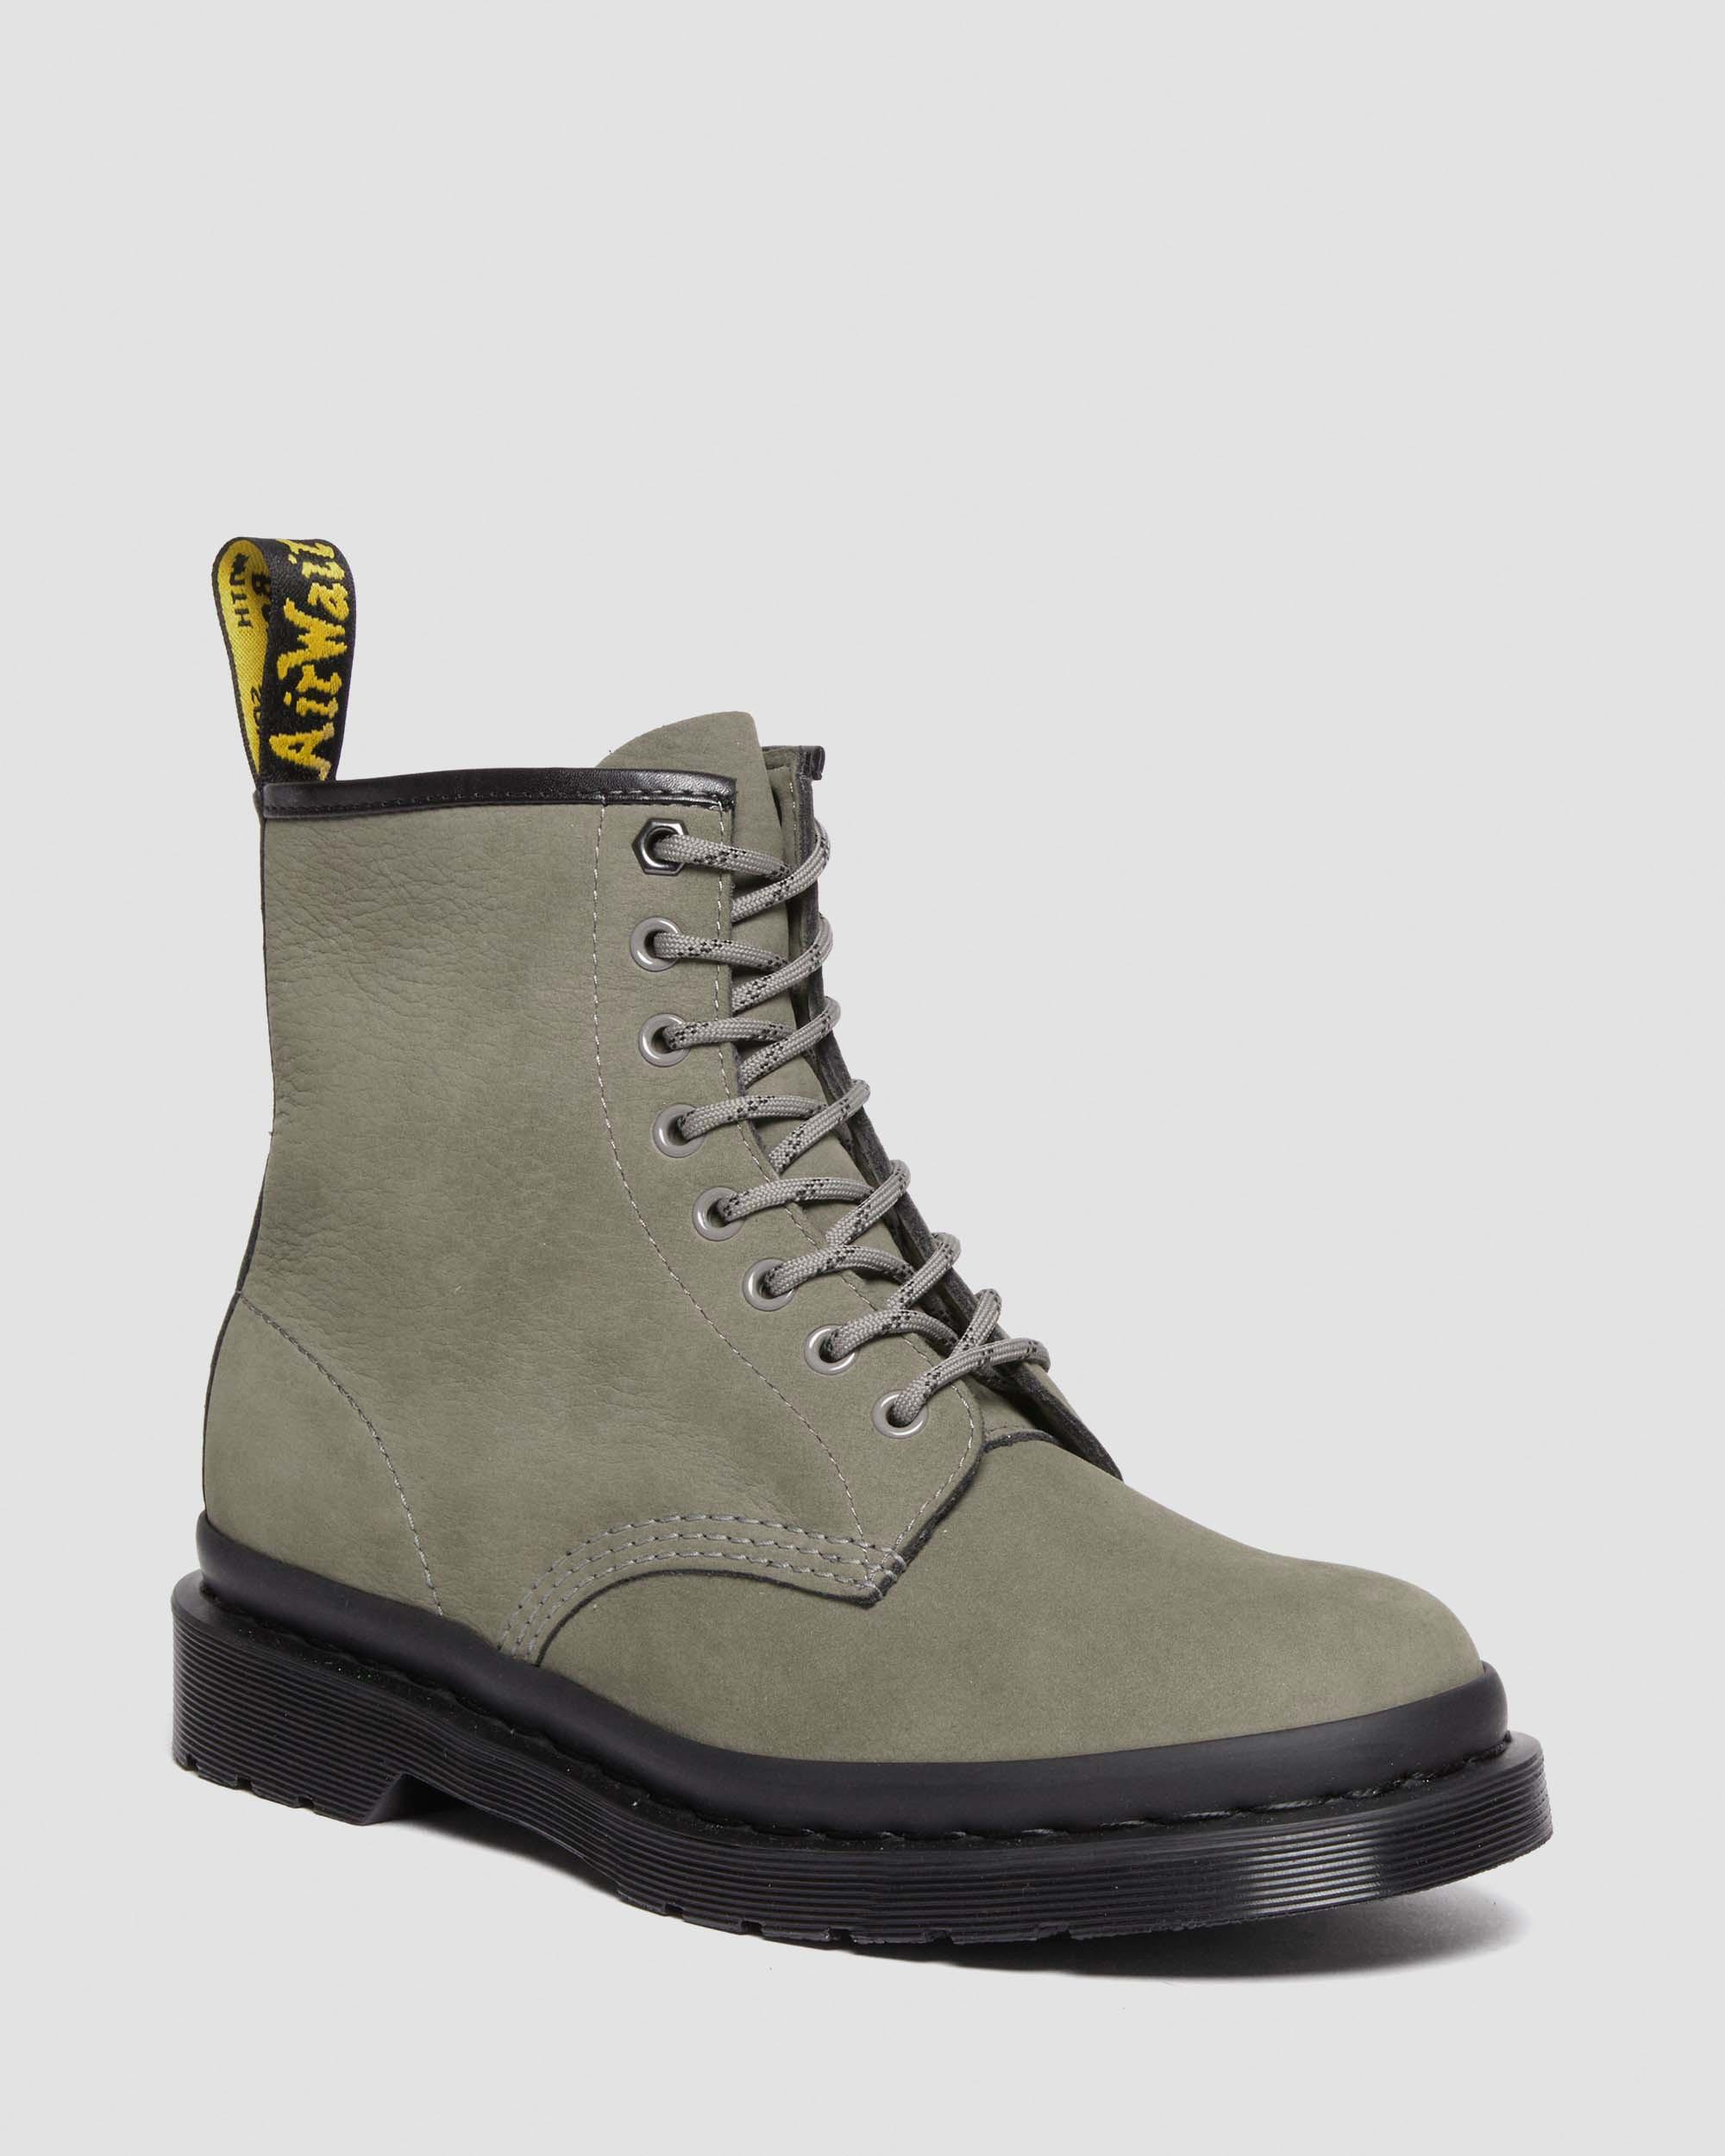 1460 Milled Nubuck Leather Lace Up Boots1460 Milled Nubuck Leather Lace Up Boots Dr. Martens